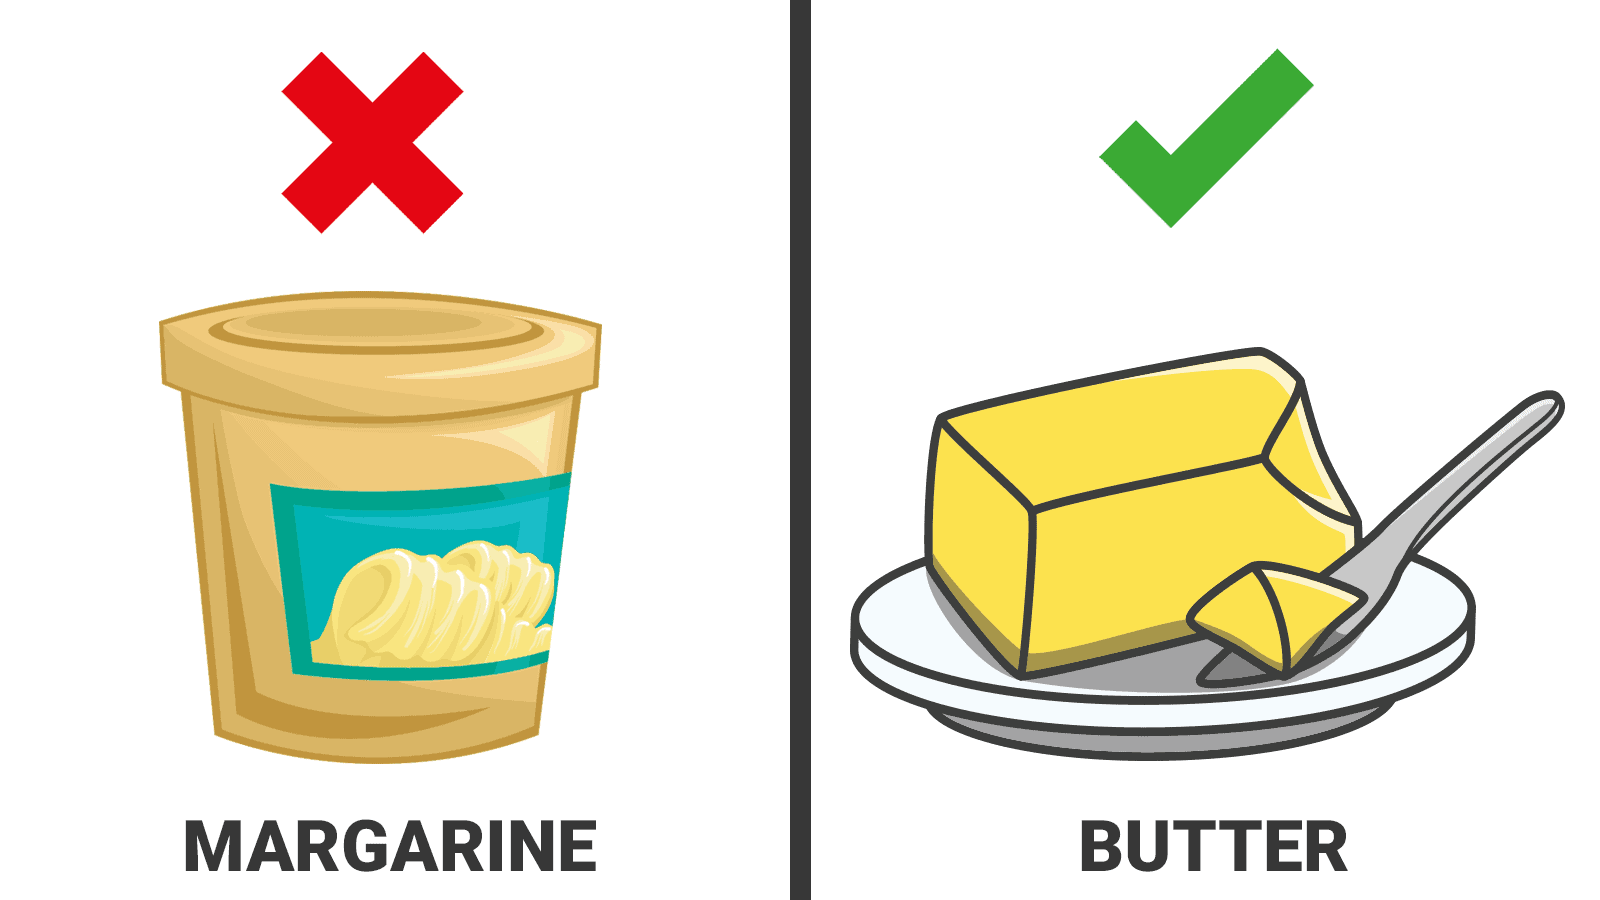 5 Differences Between Butter and Margarine (That People Don’t Know About)